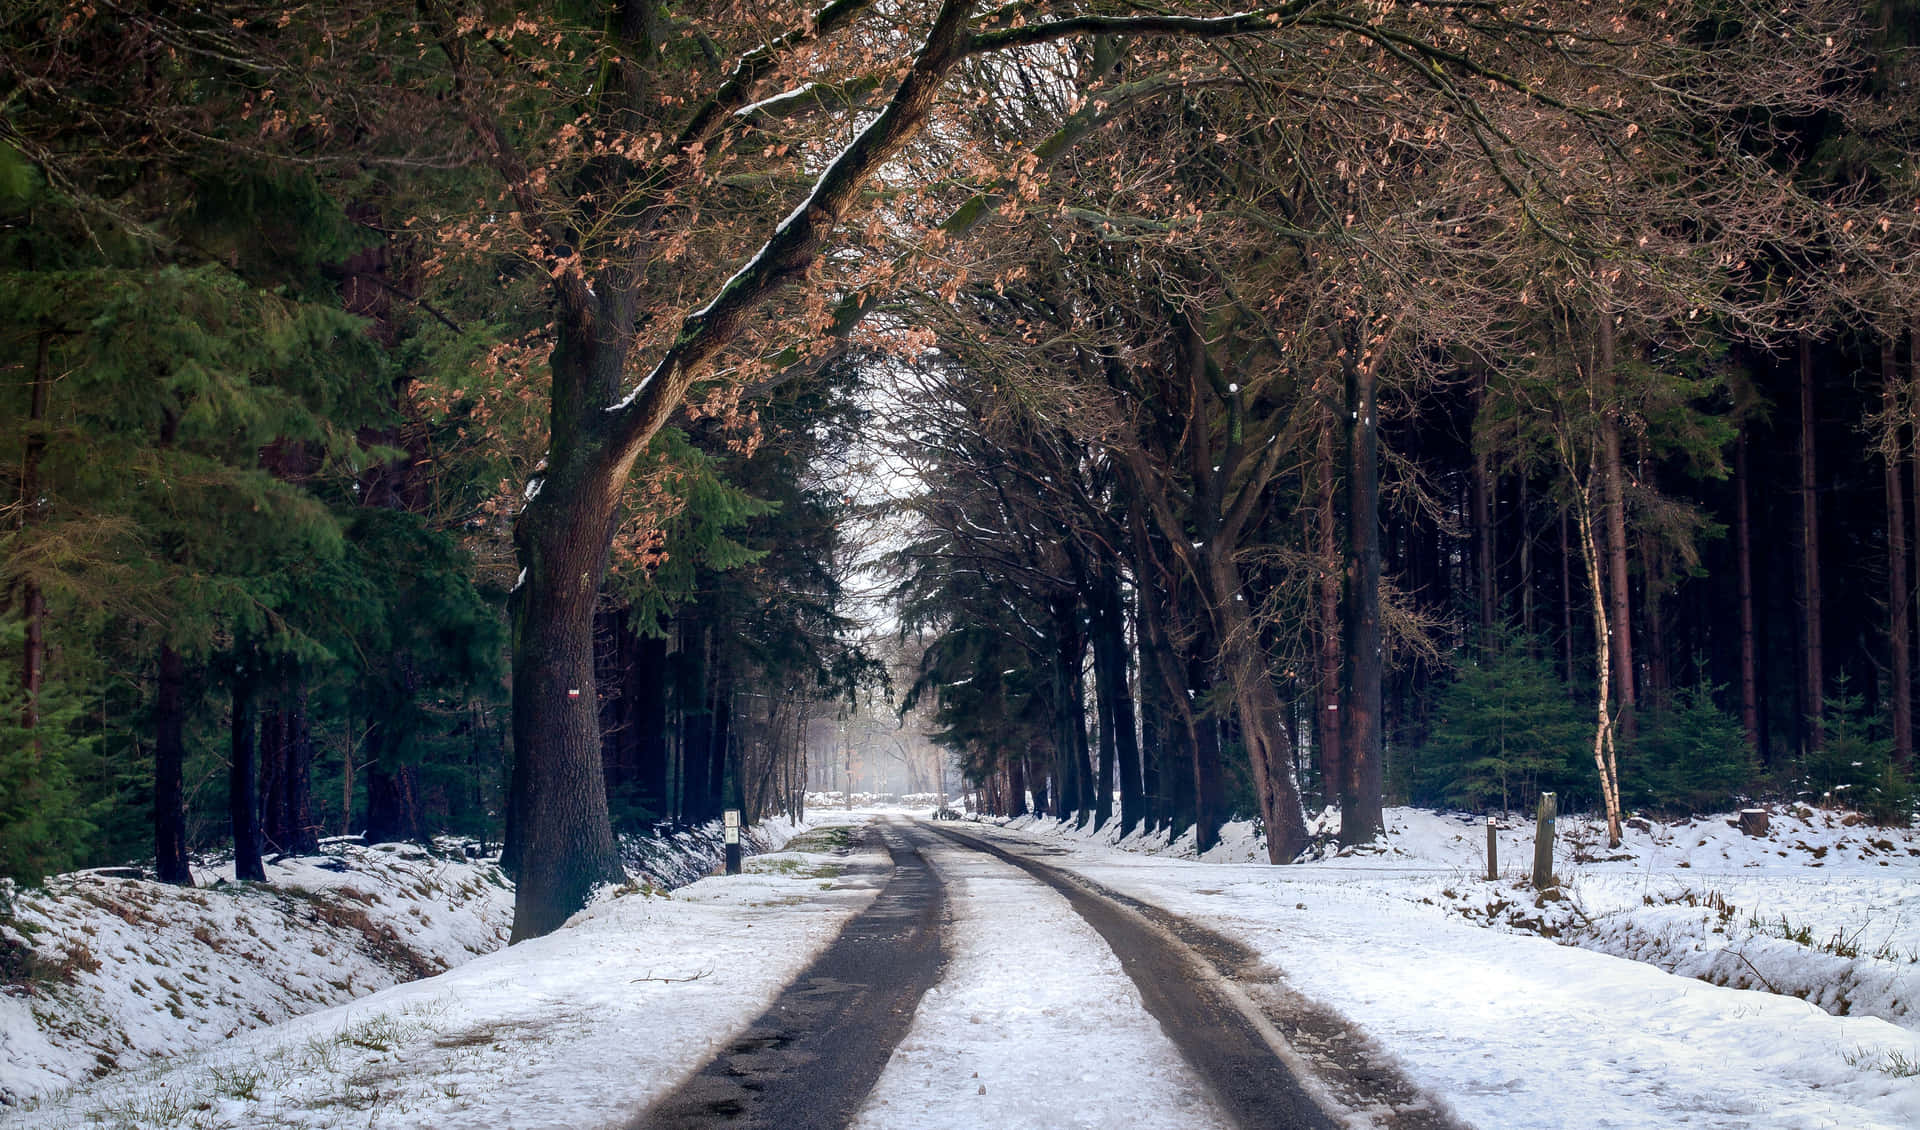 A Snowy Road In The Woods